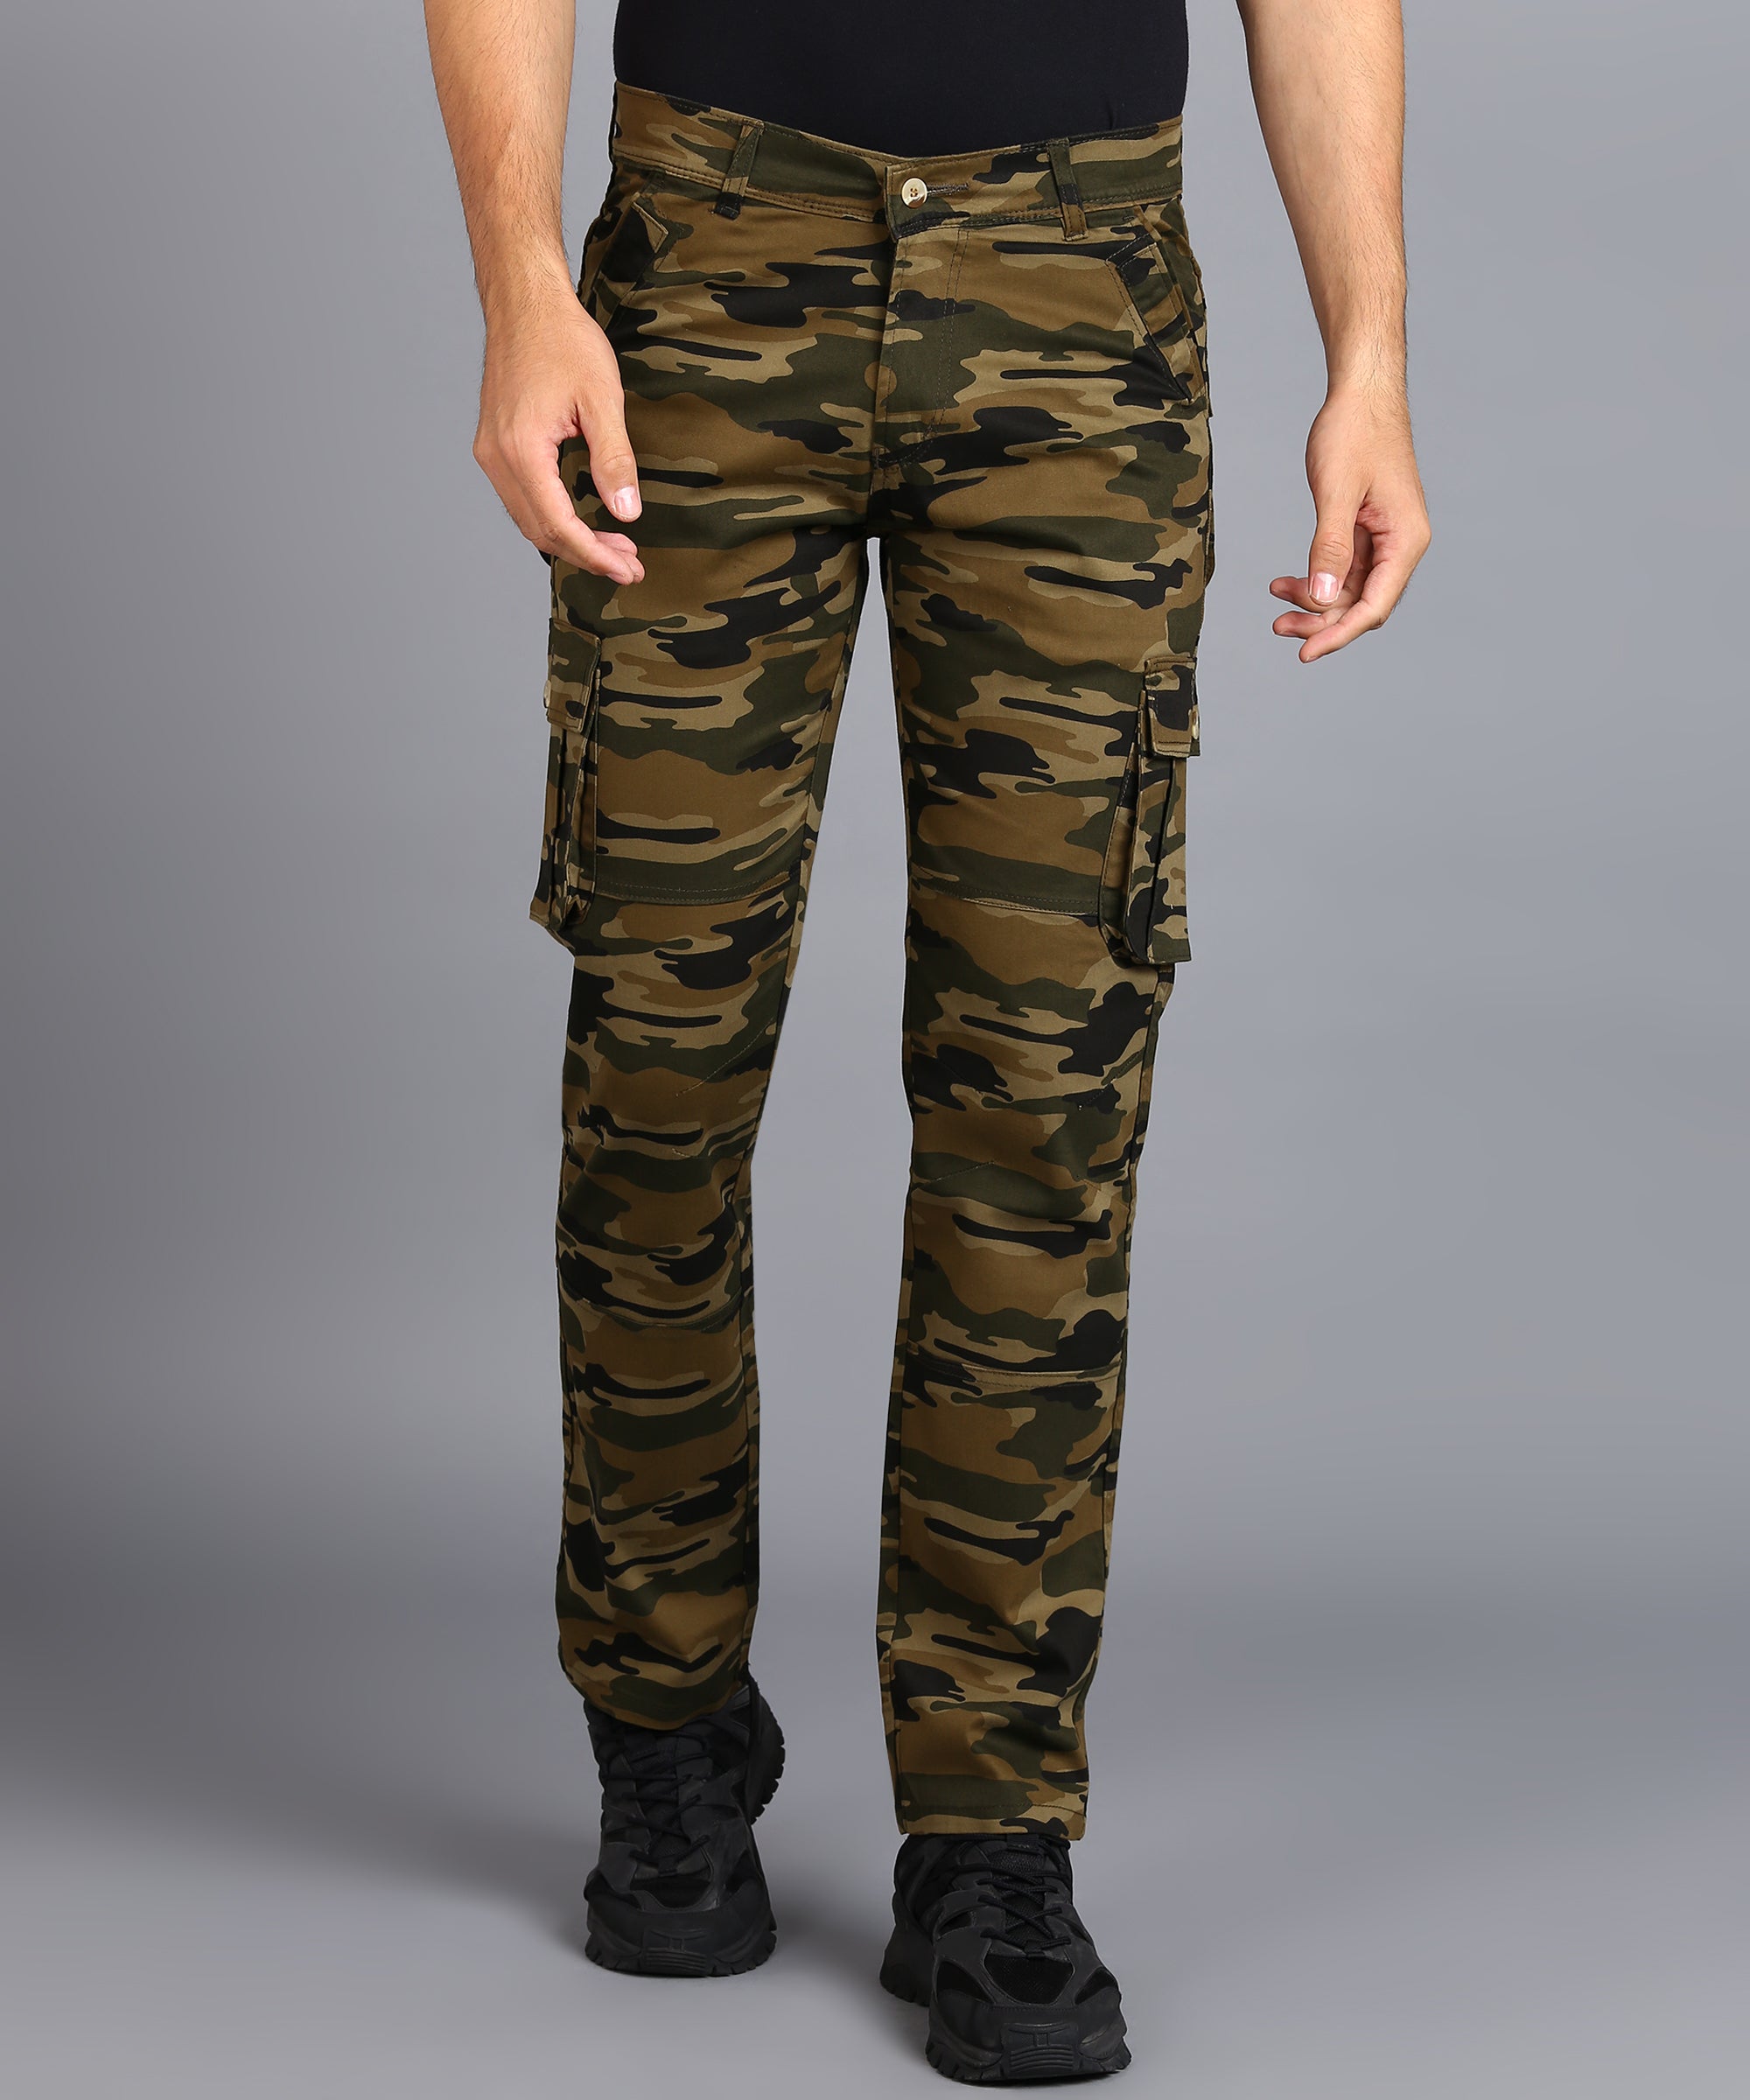 Men's Green Regular Fit Military Camouflage Cargo Chino Pant with 6 Pockets